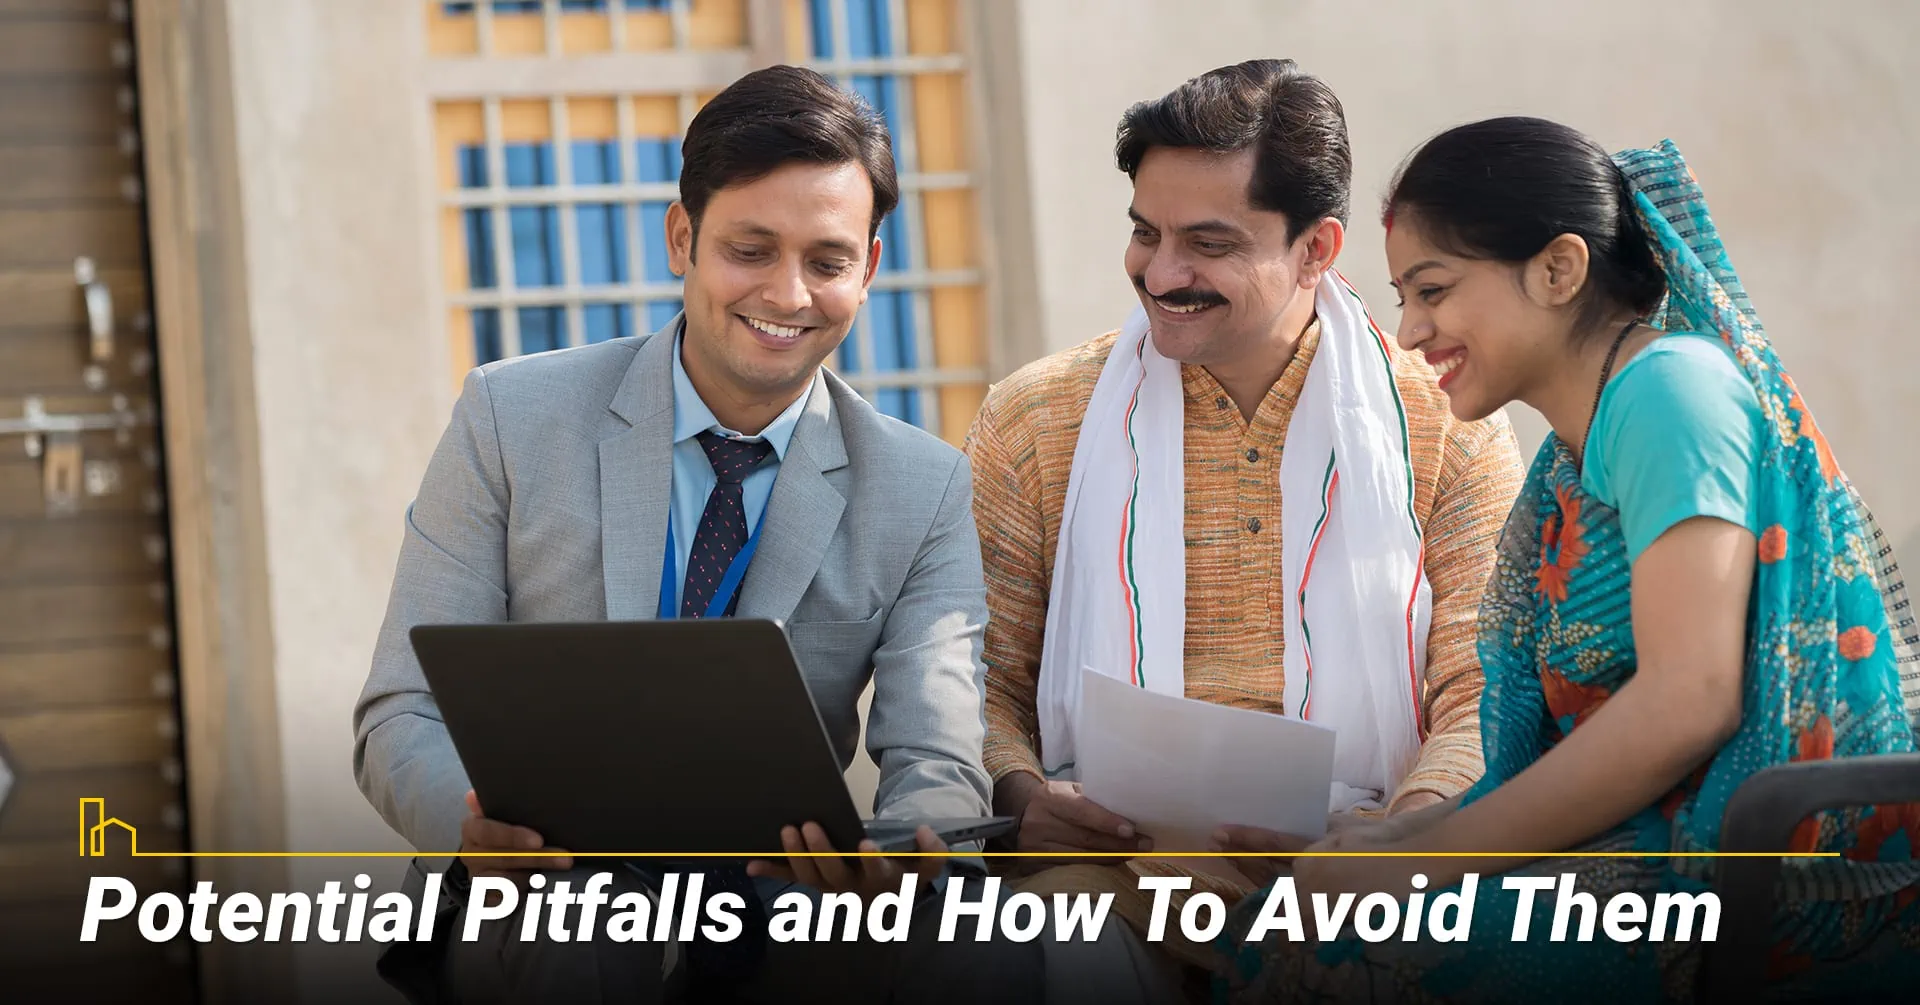 Potential Pitfalls and How To Avoid Them